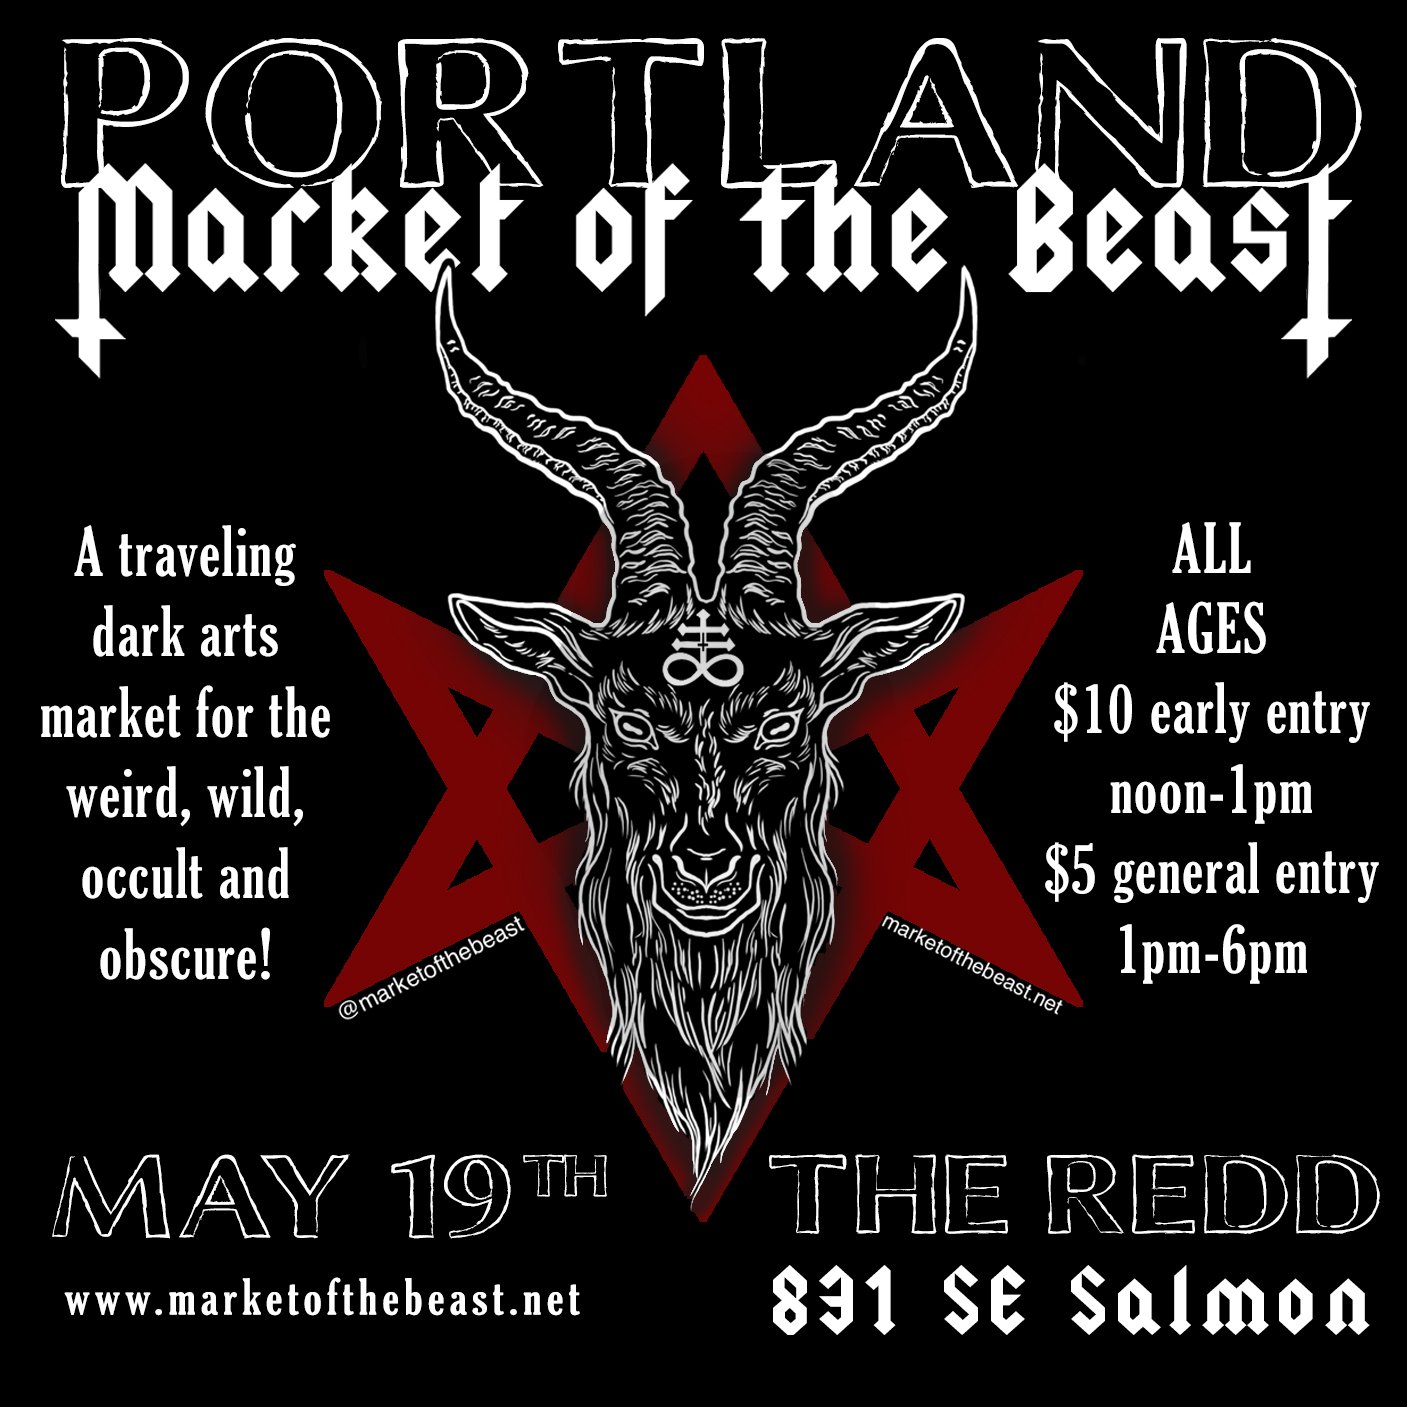 Weird Works will be at the Portland @marketofthebeast next weekend! Come say hello and buy some weird stuff!

May 19th @reddonsalmon (all ages)
$10 Early Entry Noon-1pm
$5 General Entry 1pm-6pm
Flyer design: @oakthornstudios
#PortlandMarketOfTheBeast